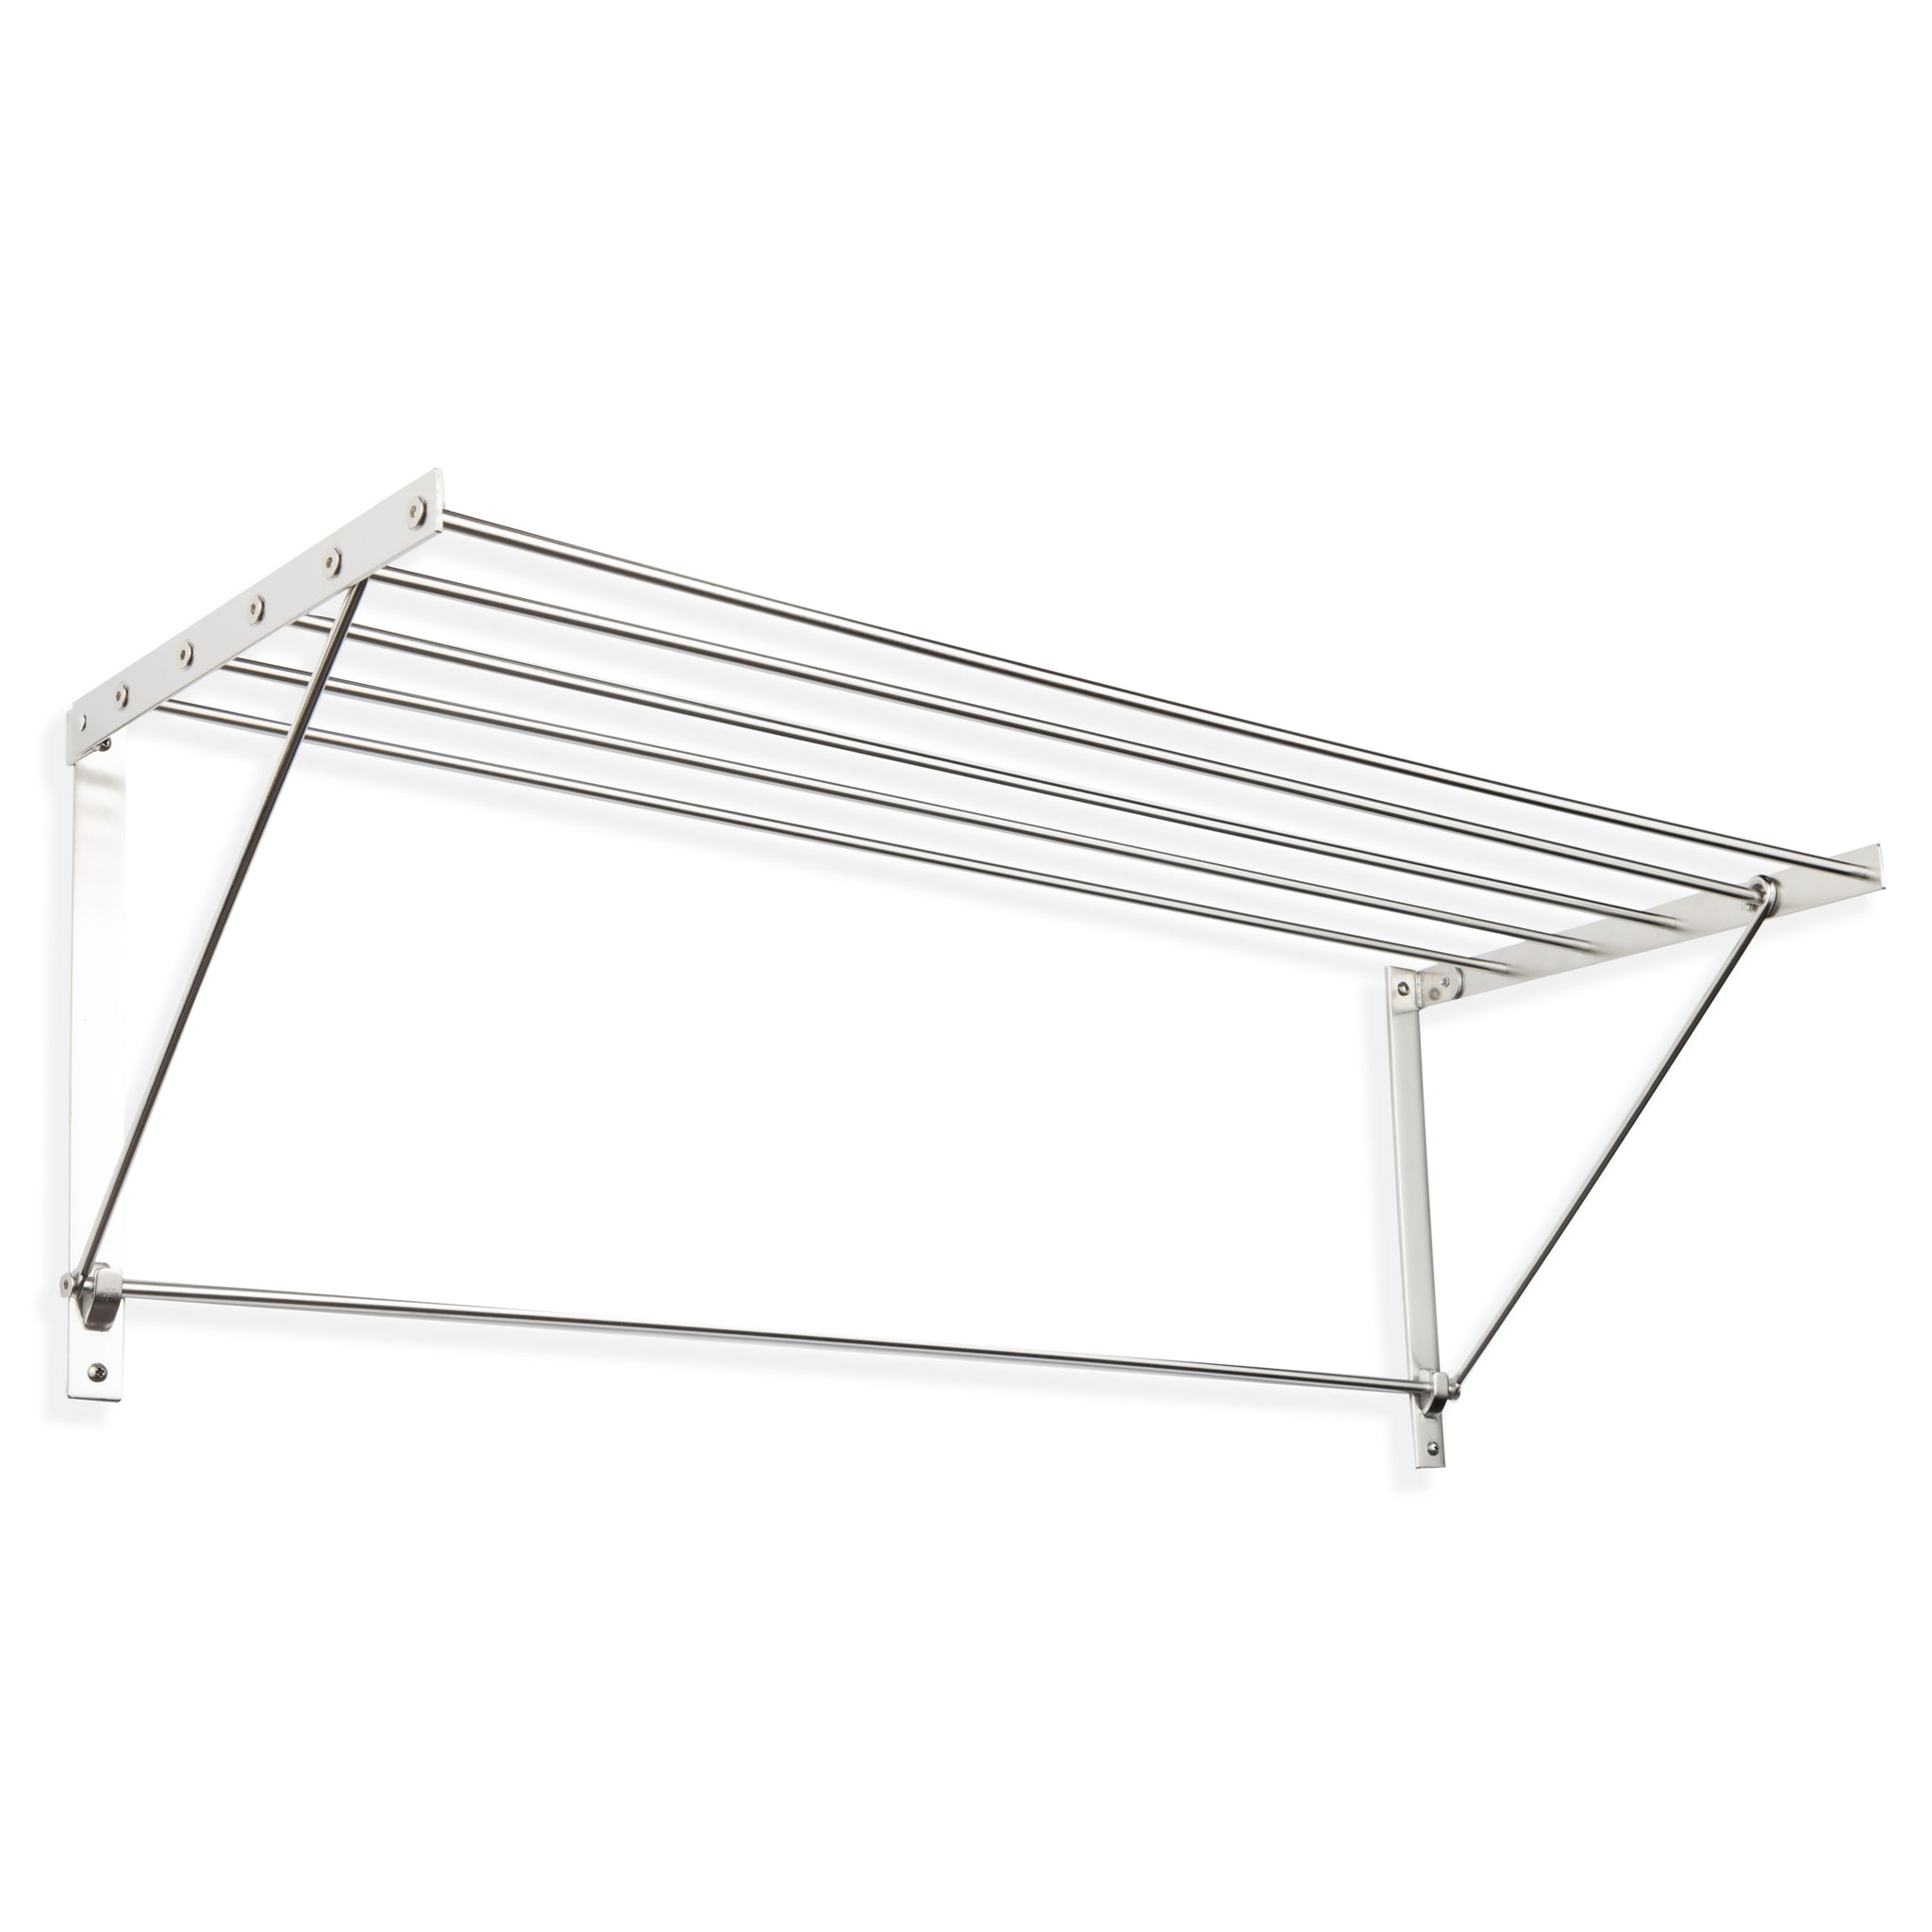 brightmaison Space Saver Wall Mounted Laundry Clothes Drying Rack